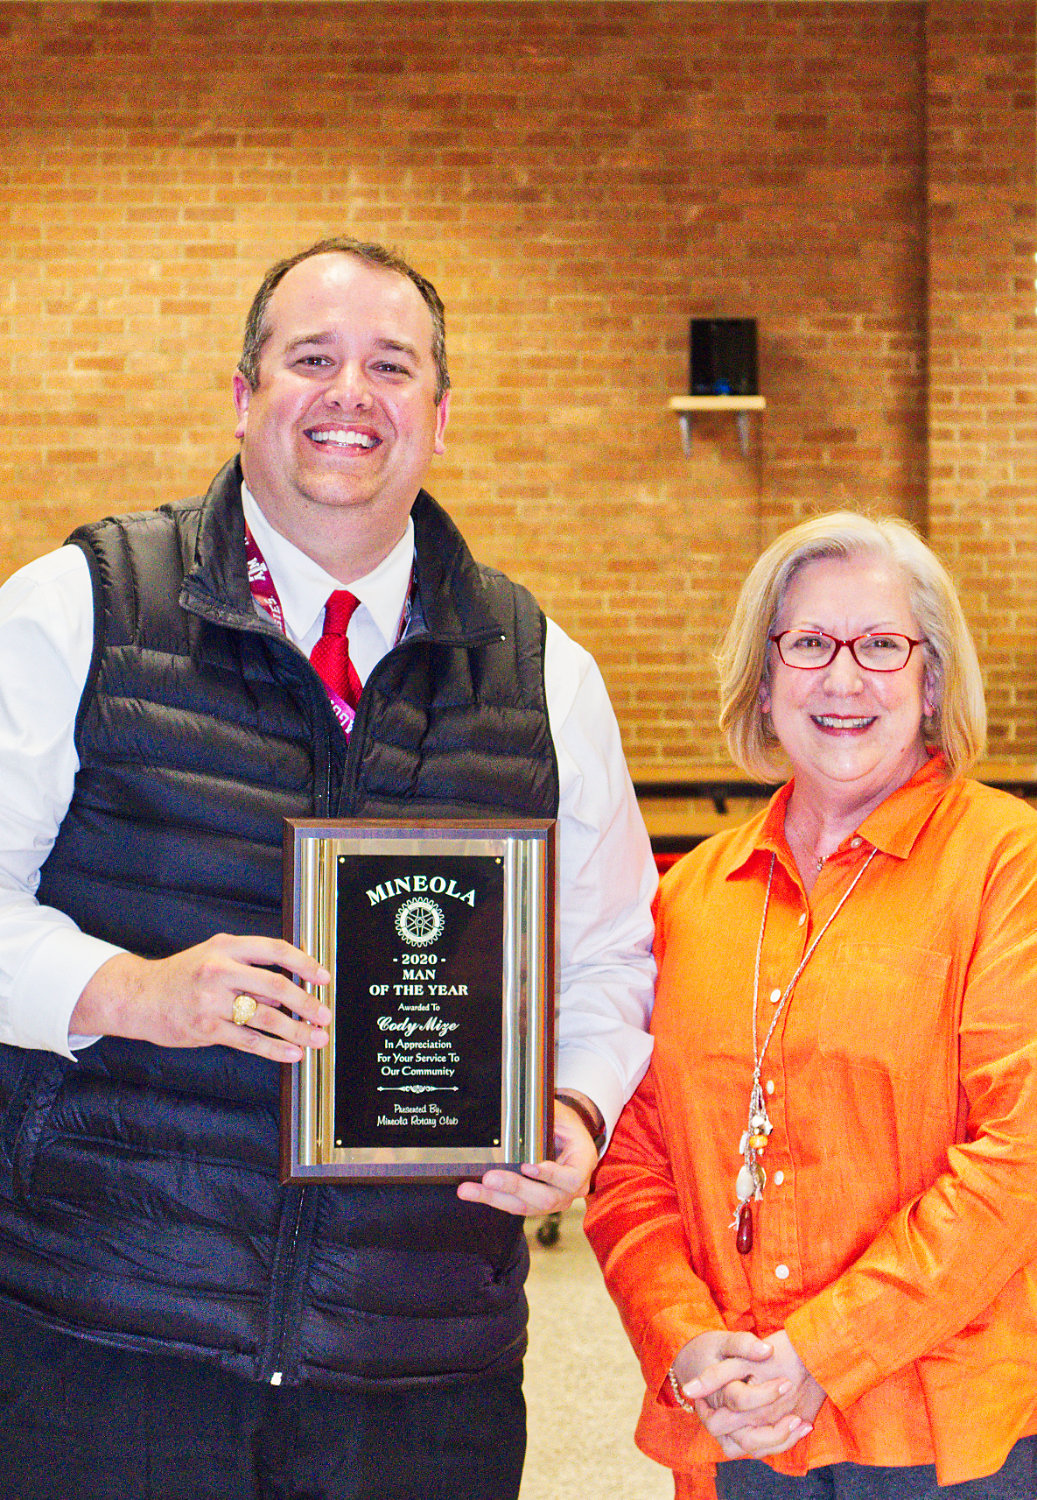 Mineola School Superintendent Cody Mize was named Mineola Man of the Year at Monday night’s school board meeting. Club President Denise Hurst presented the honor.